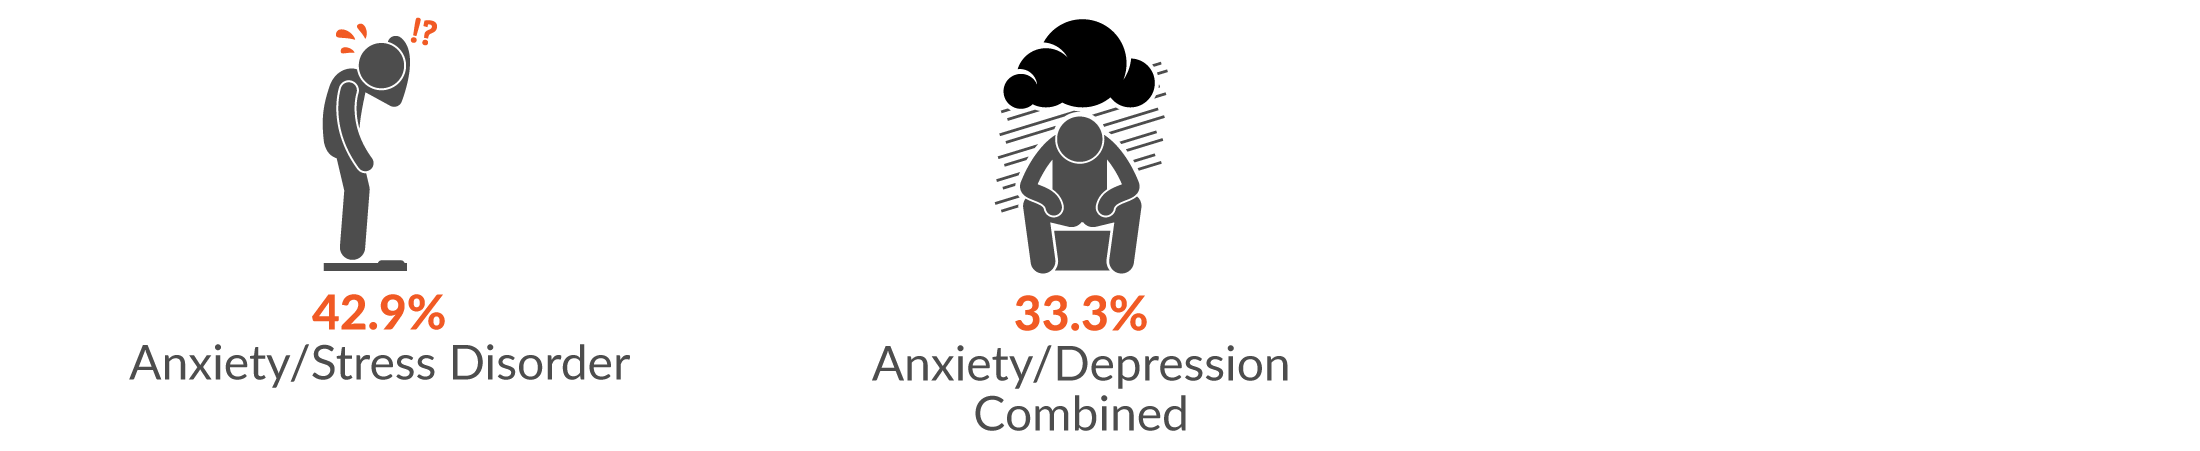 42.9 Anxiety/stress disorder; and 33.3% Anxiety/depression combined.